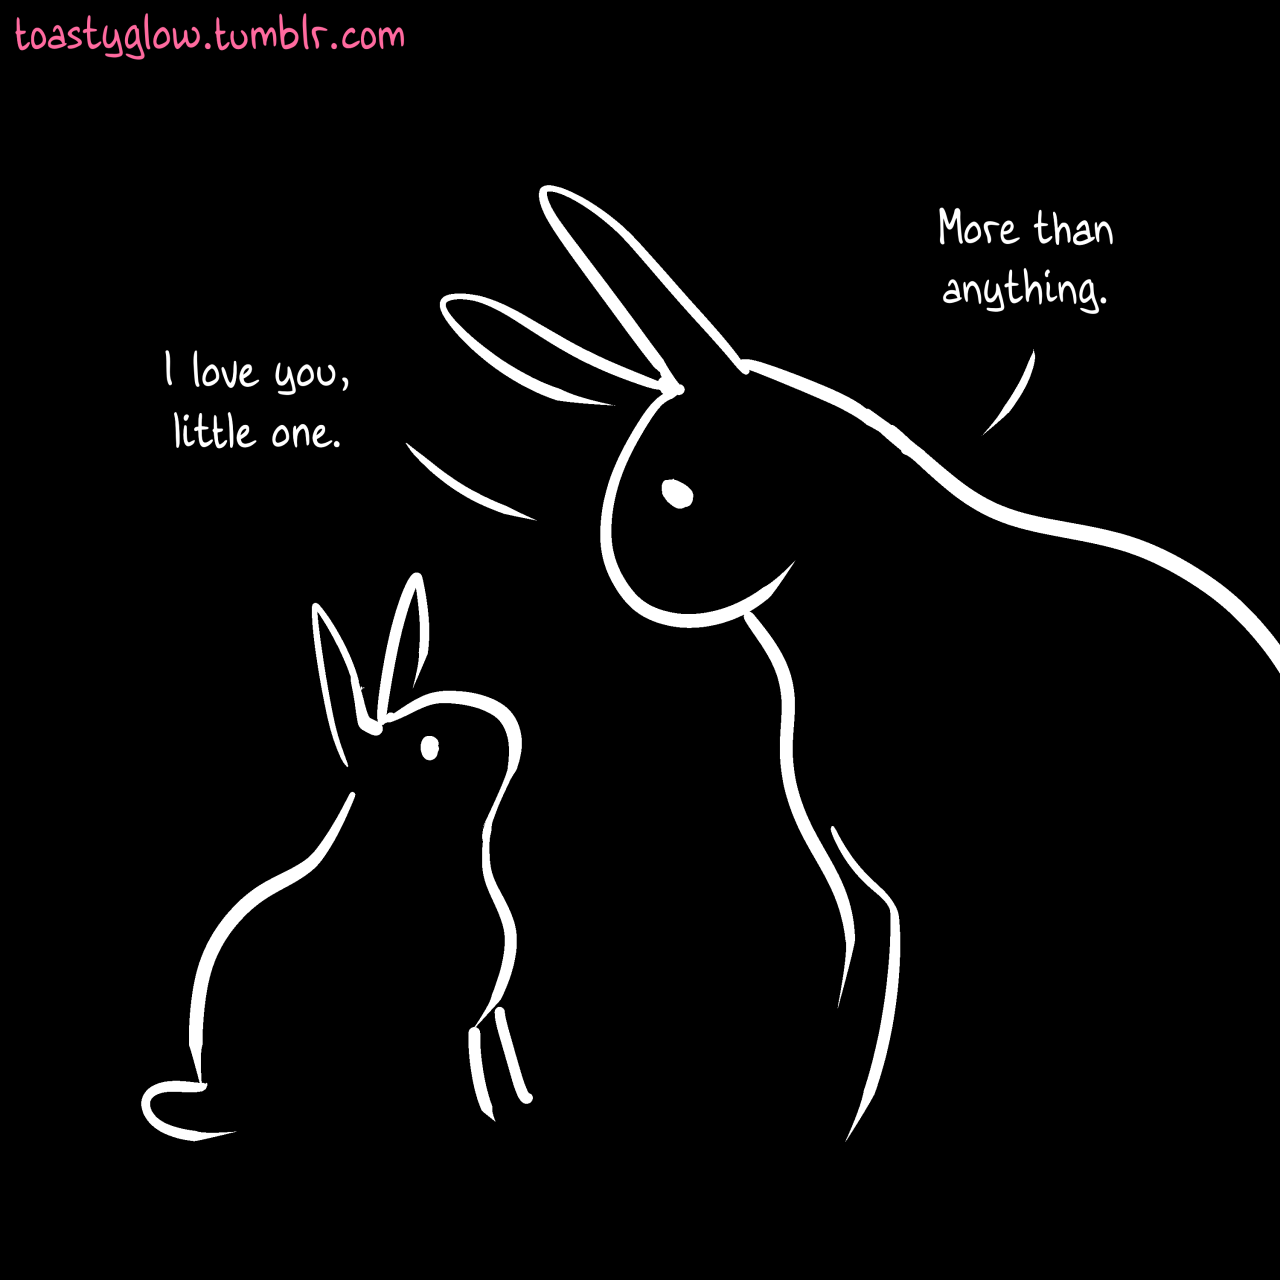 In a dark, colorless space, grown rabbit tells a smaller rabbit, "I love you, little one.  More than anything."